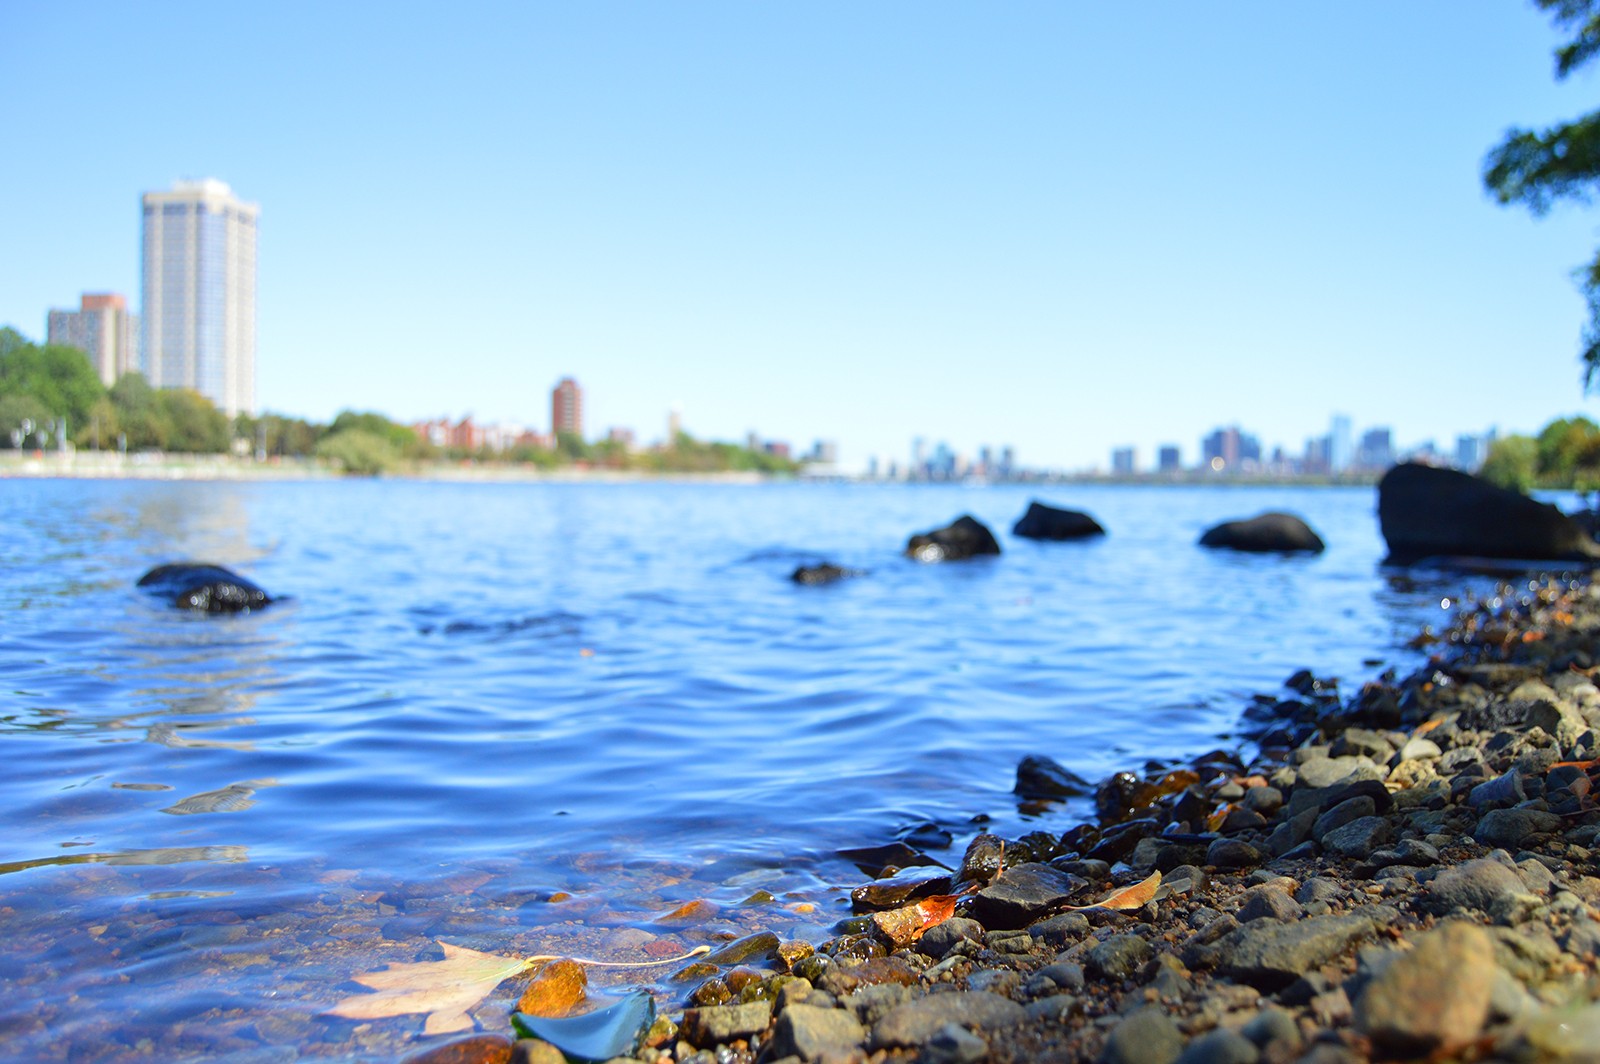 Environmental officials have warned residents to be cautious of their contact with the Charles River after an outbreak of a potentially harmful bacteria was discovered in some parts. PHOTO BY ERIN BILLINGS/ DAILY FREE PRESS STAFF 